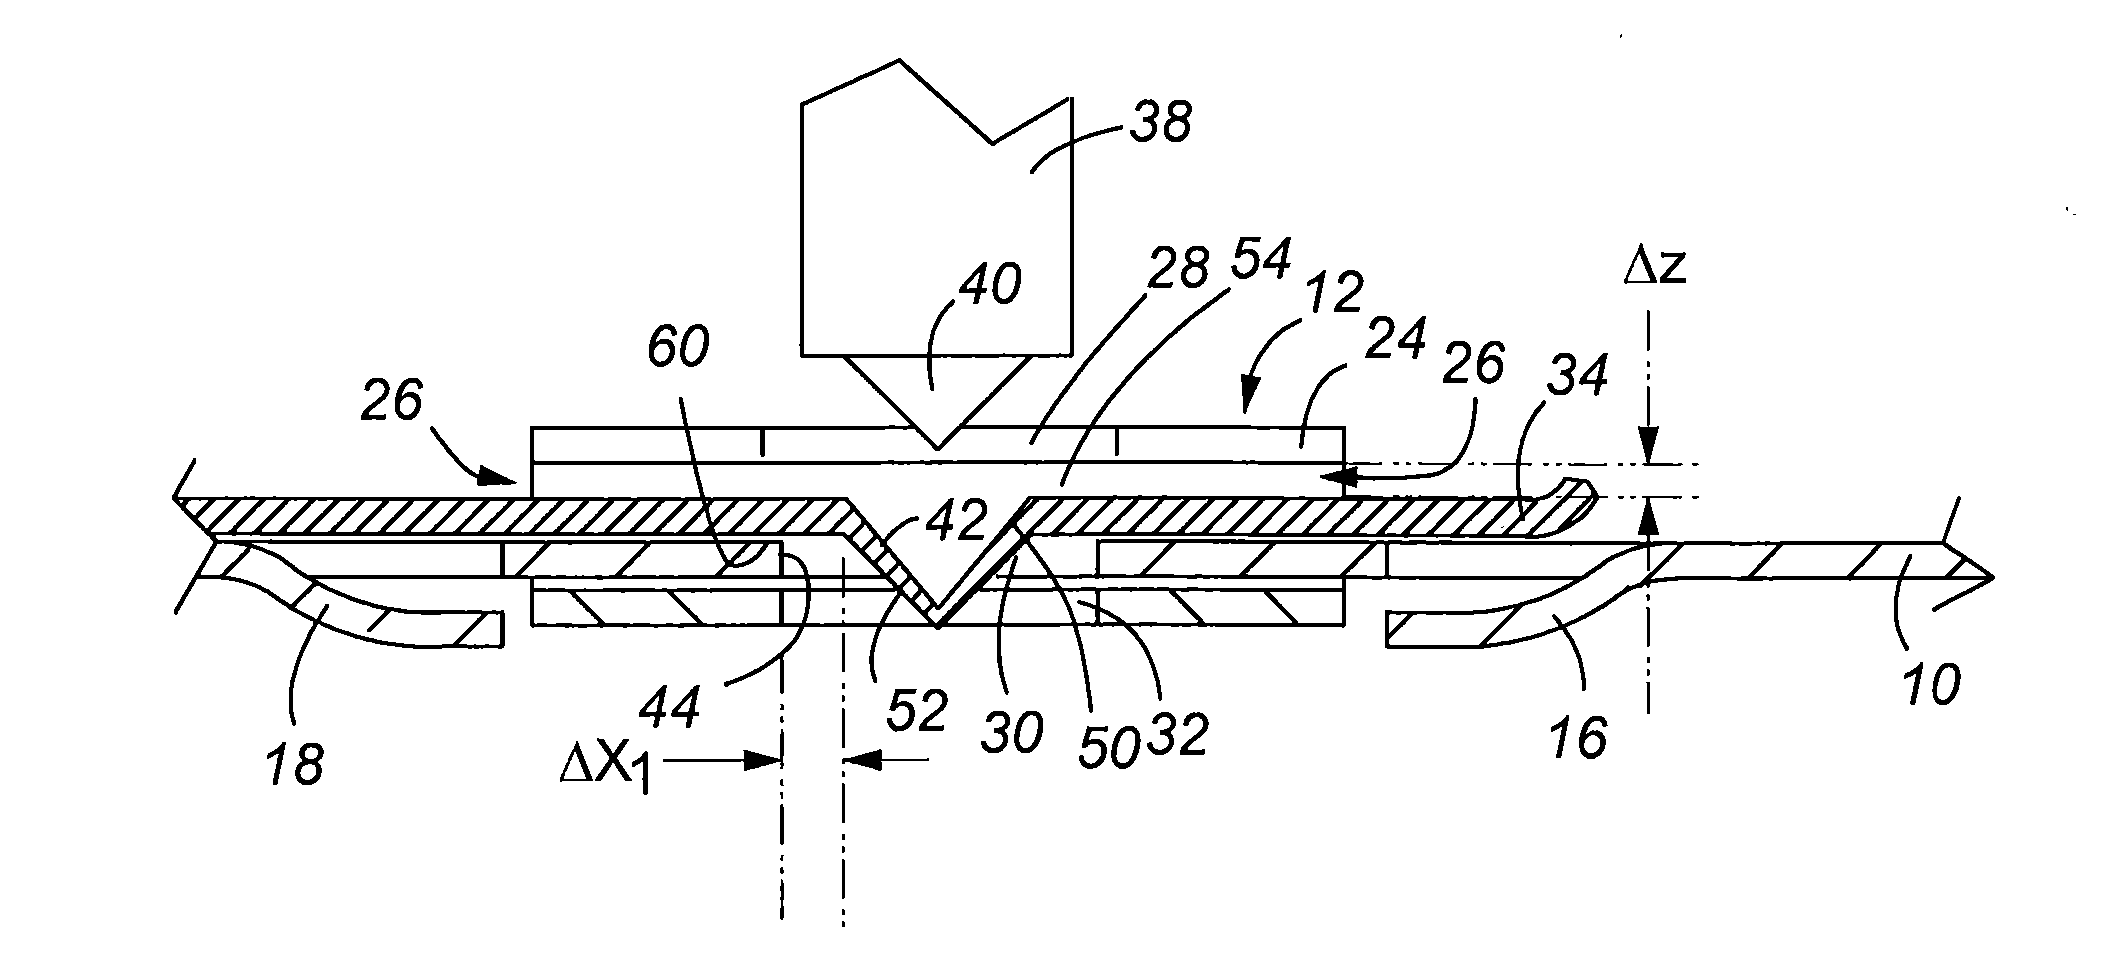 Method and apparatus for bundling objects